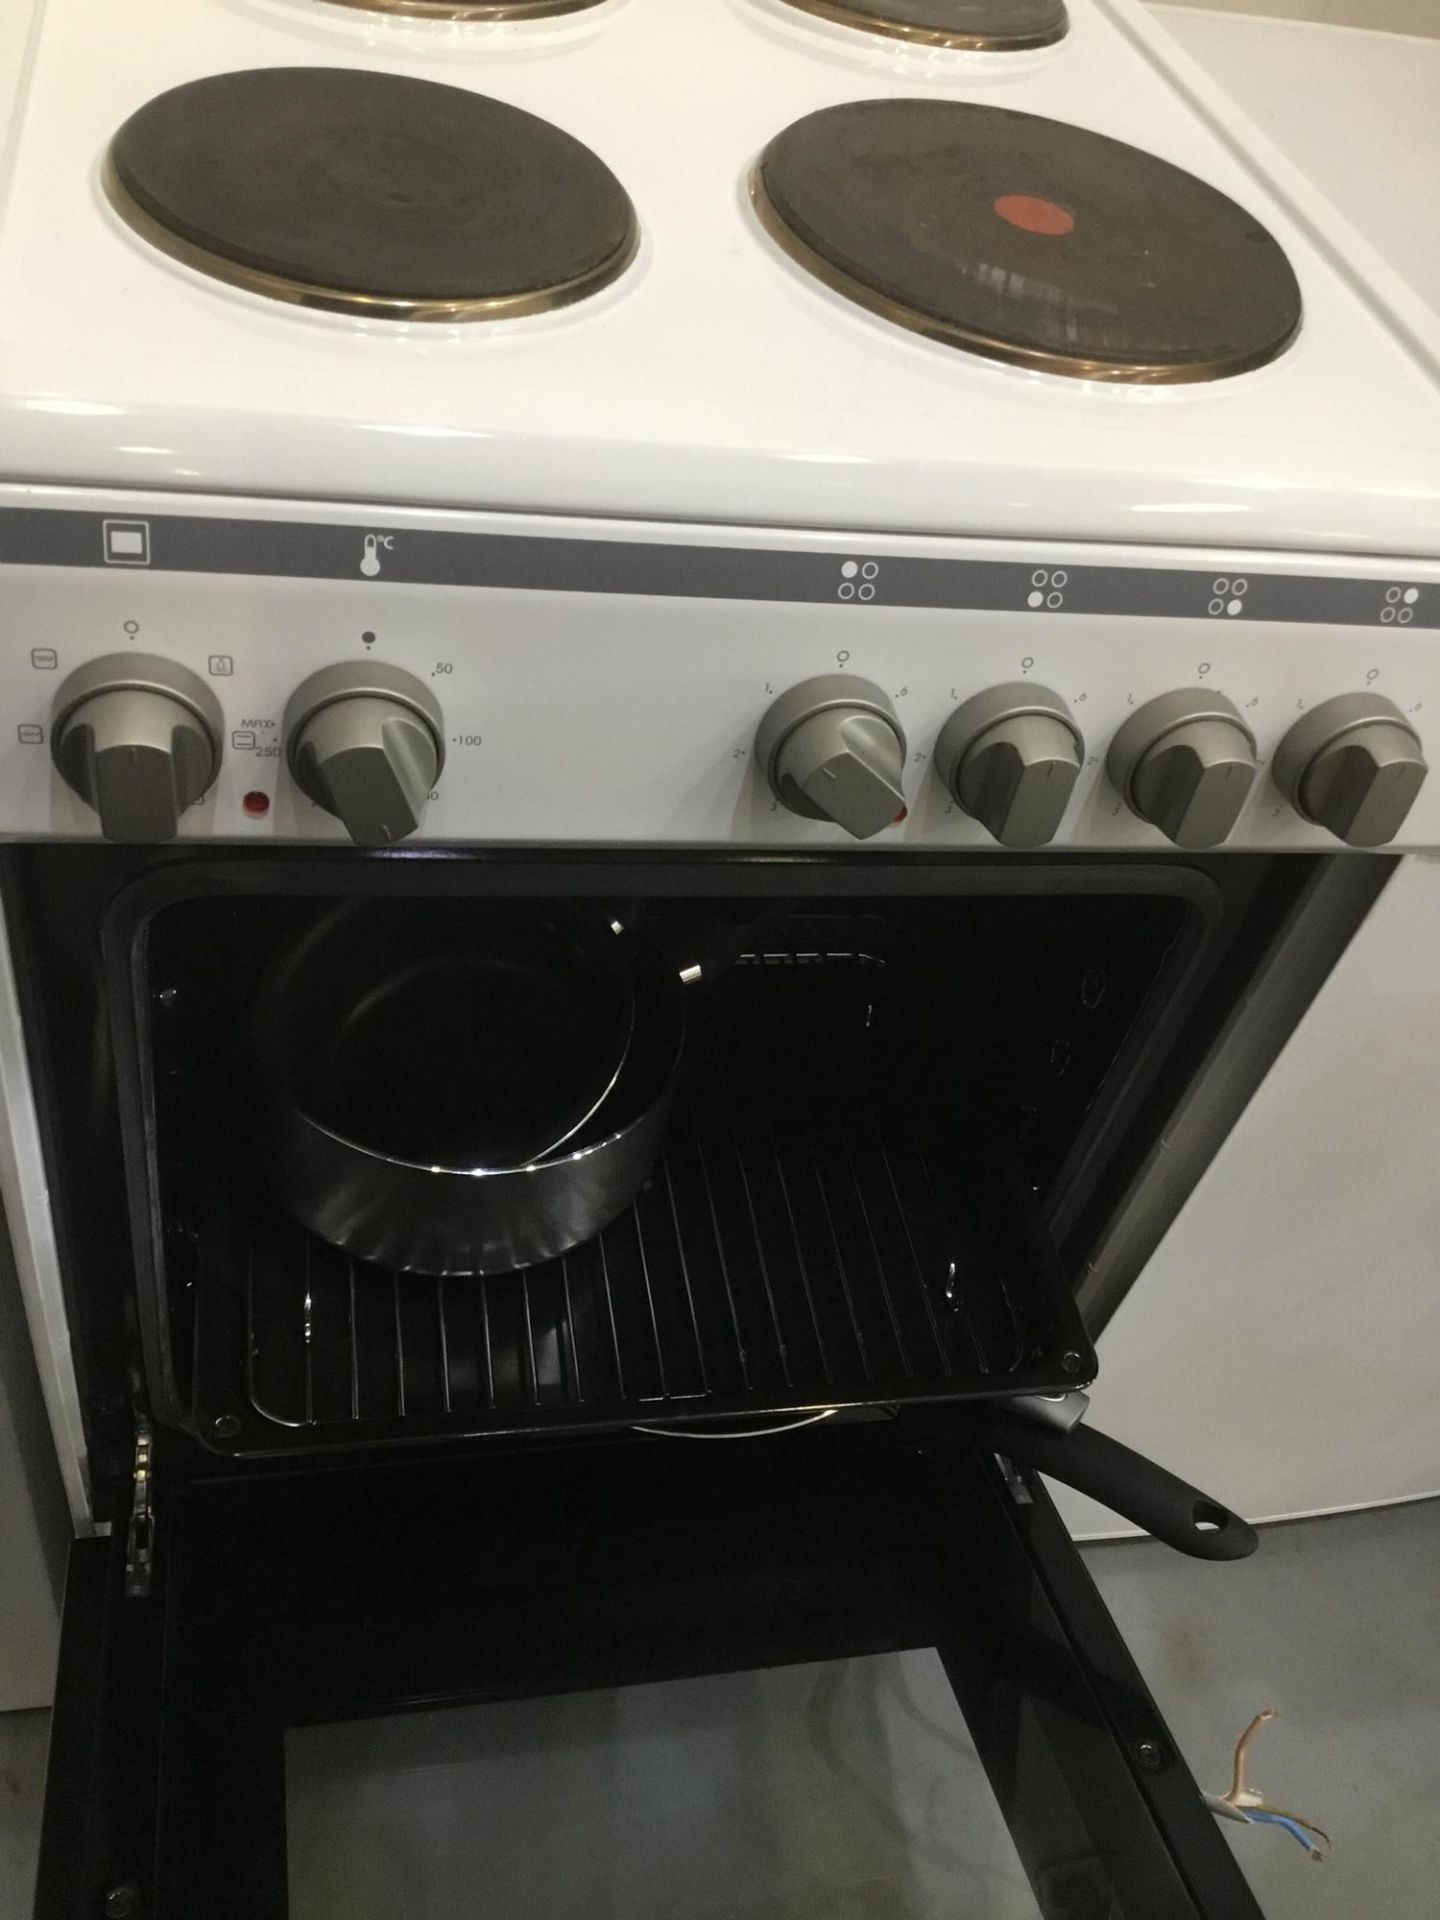 Electric cooker - Image 2 of 2